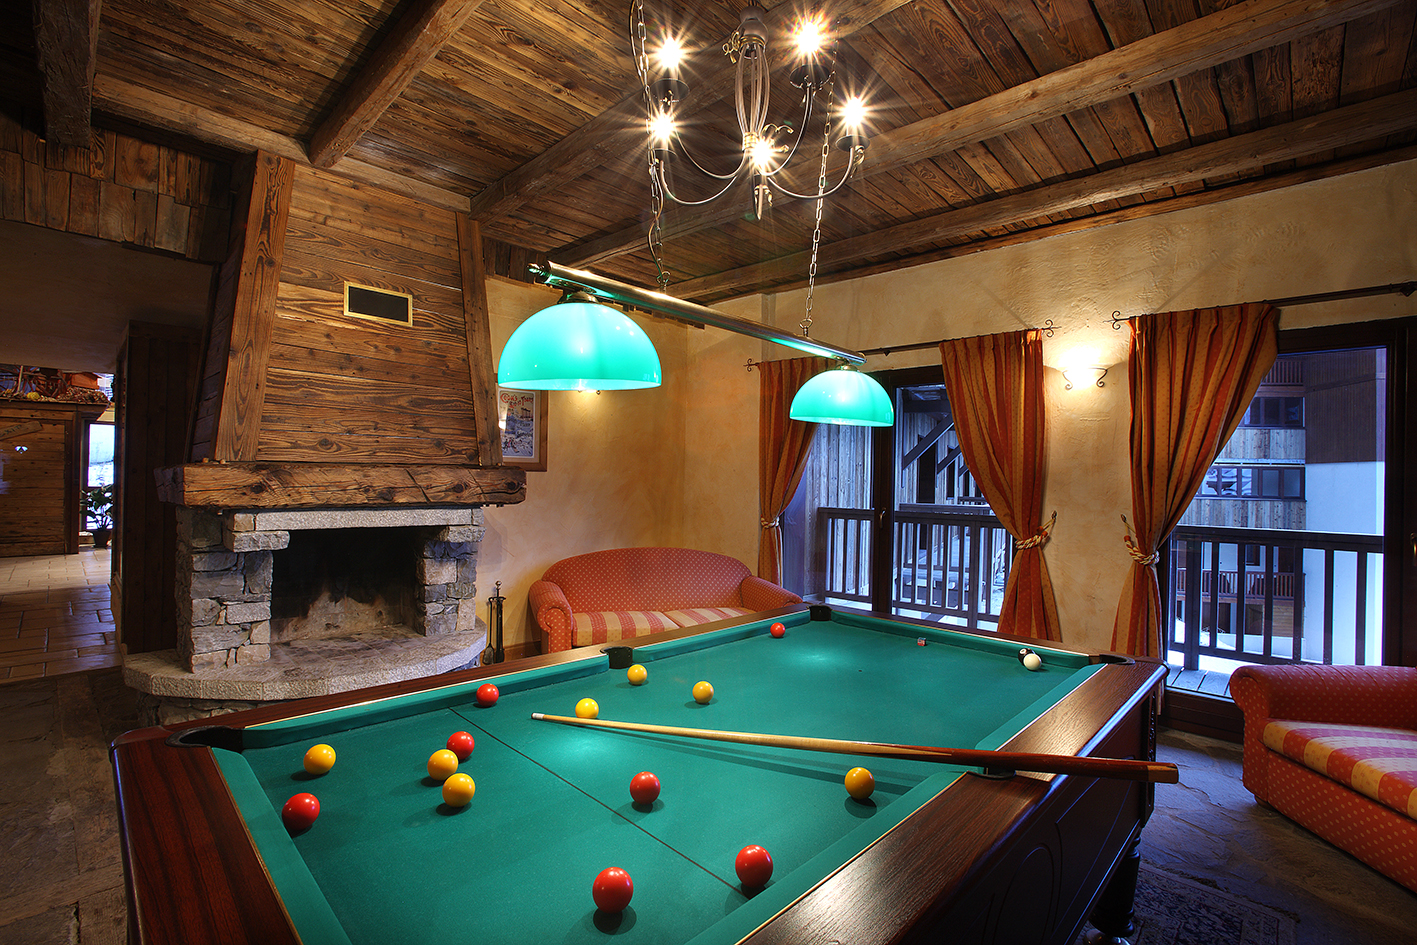 An image of the pool table in the residence